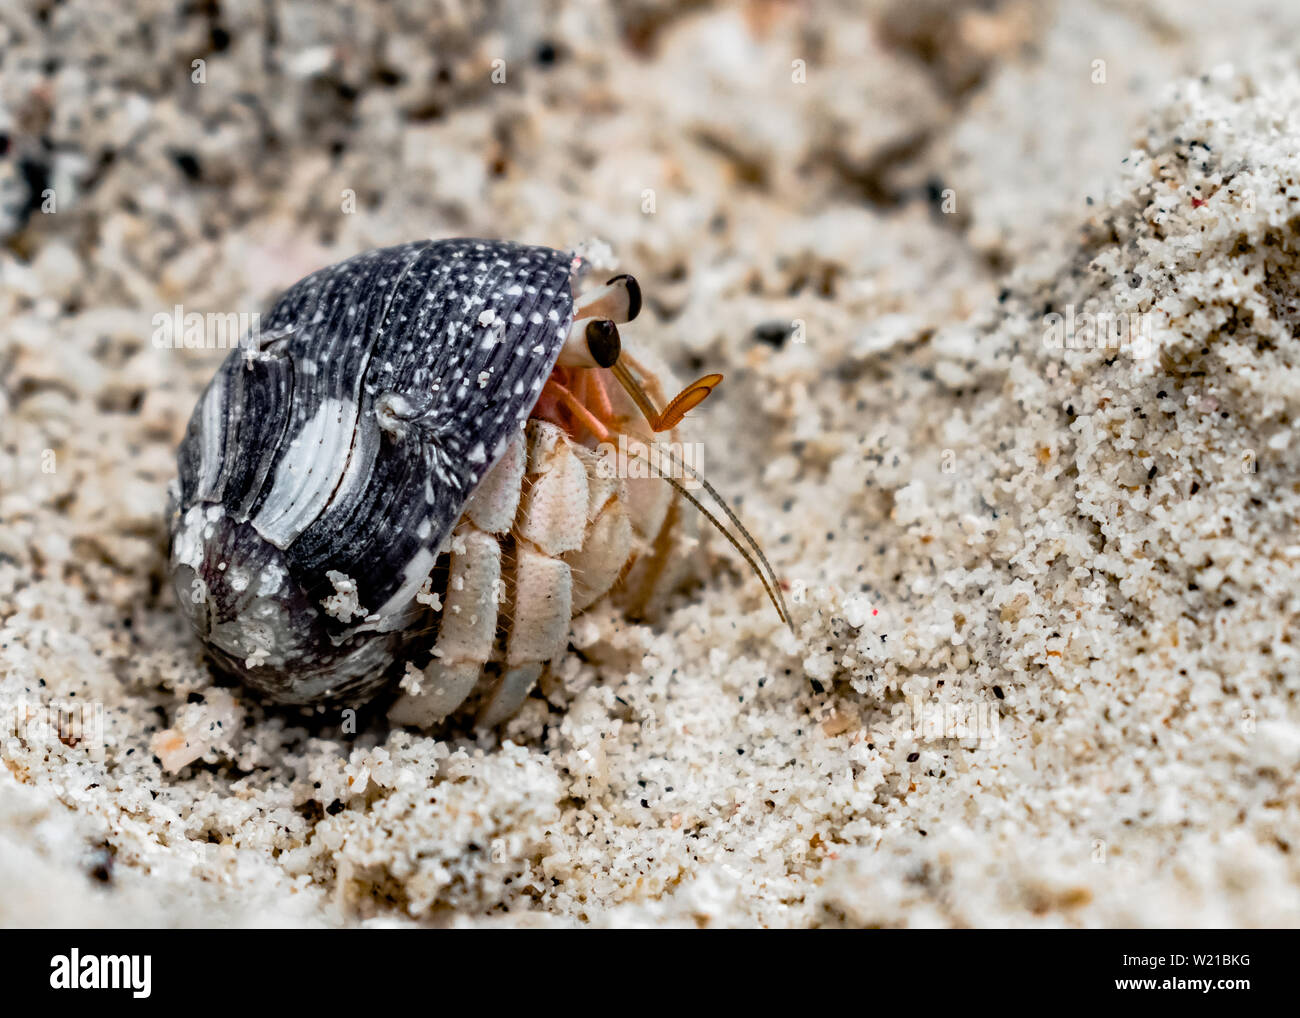 Coenobita rugosus, known as Hermit Crab, peeping from shell, to observe surroundings through flagellum and antennae. Crustacean of family Paguroidea Stock Photo